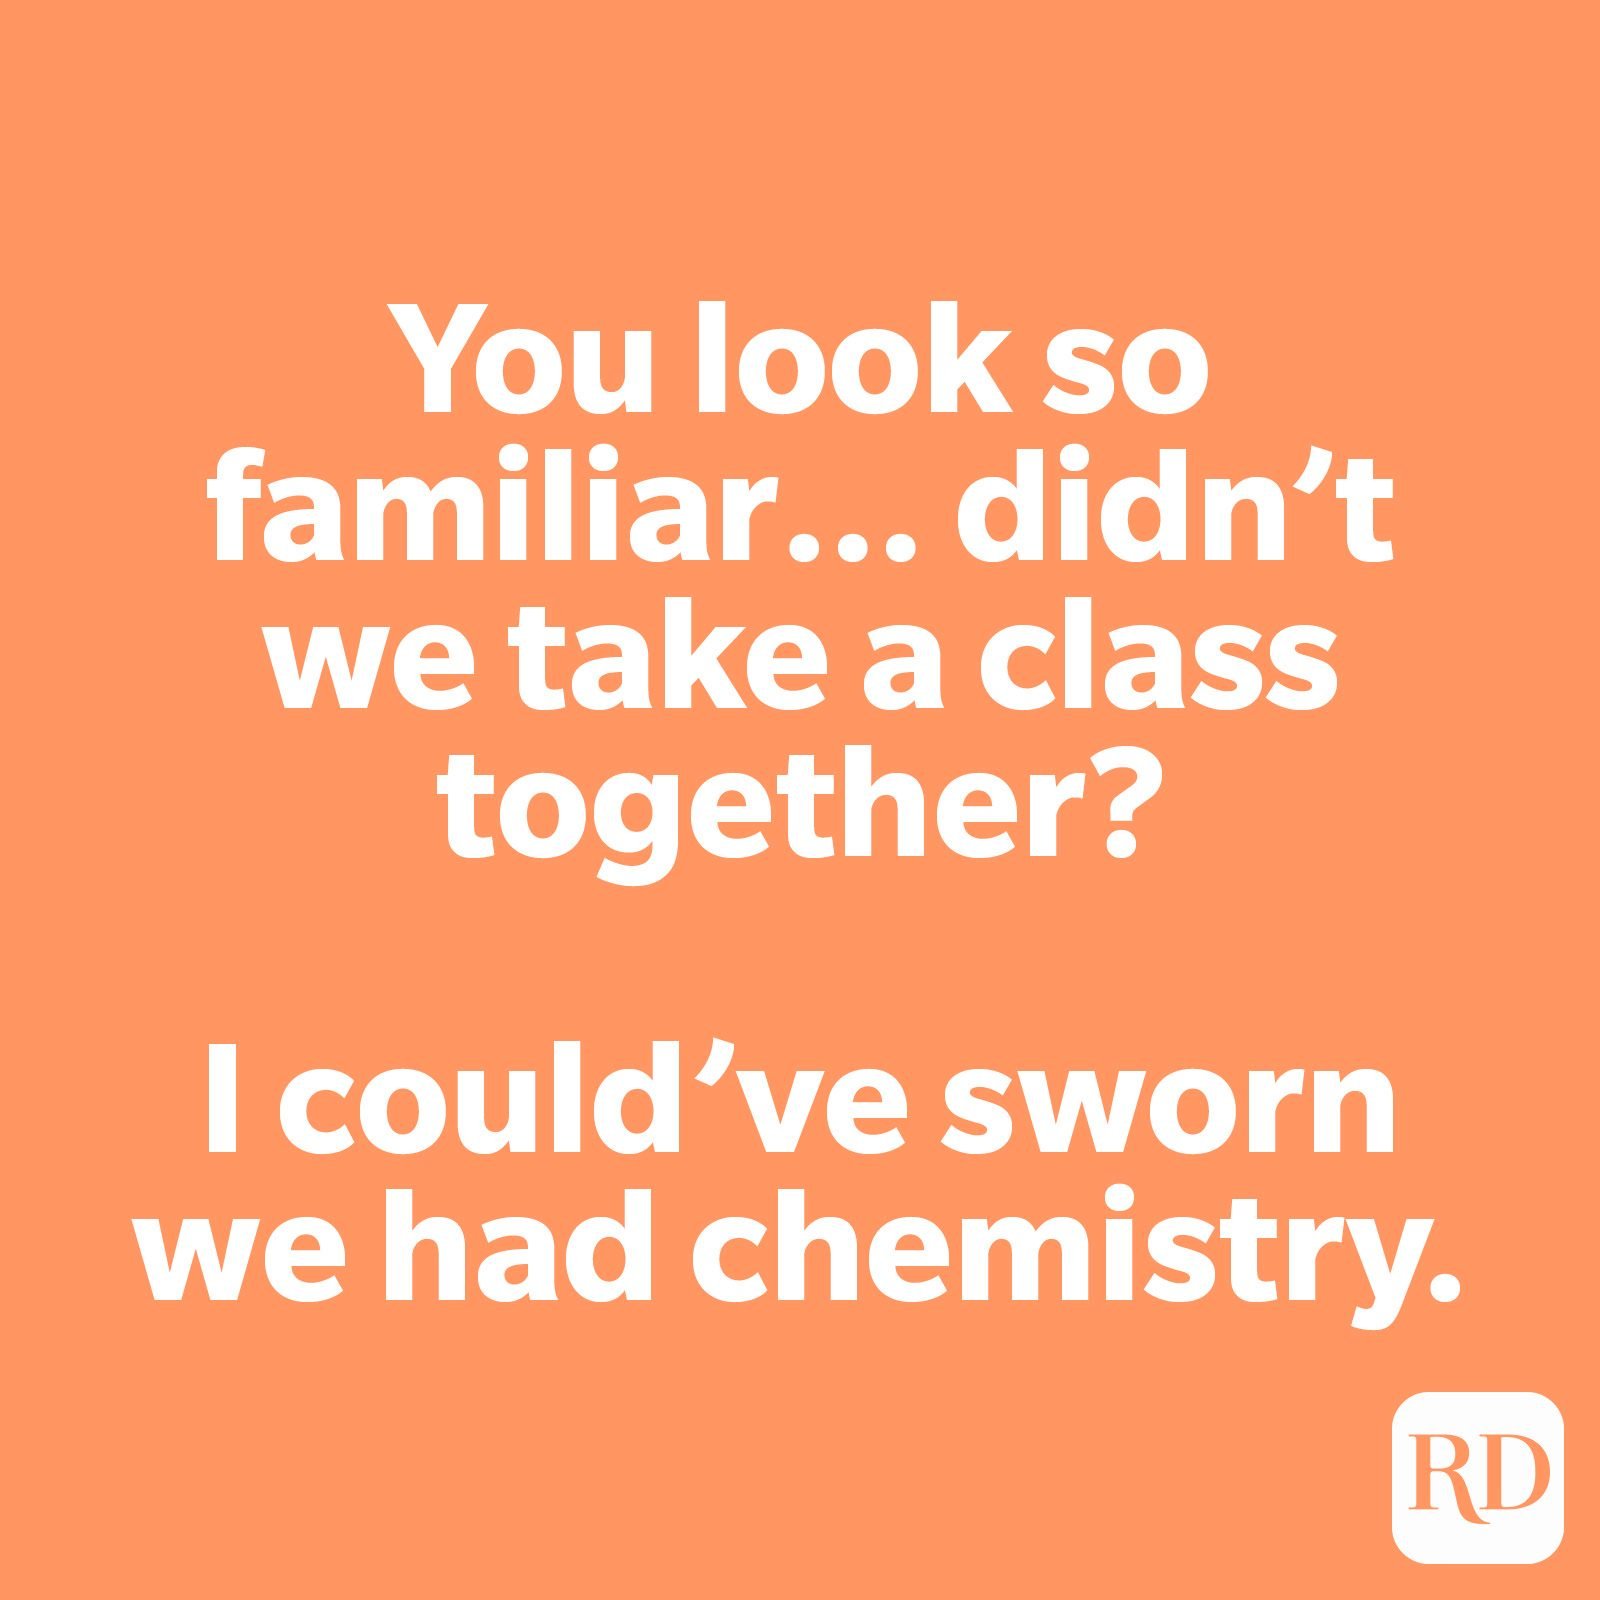 Nerdy chat up lines